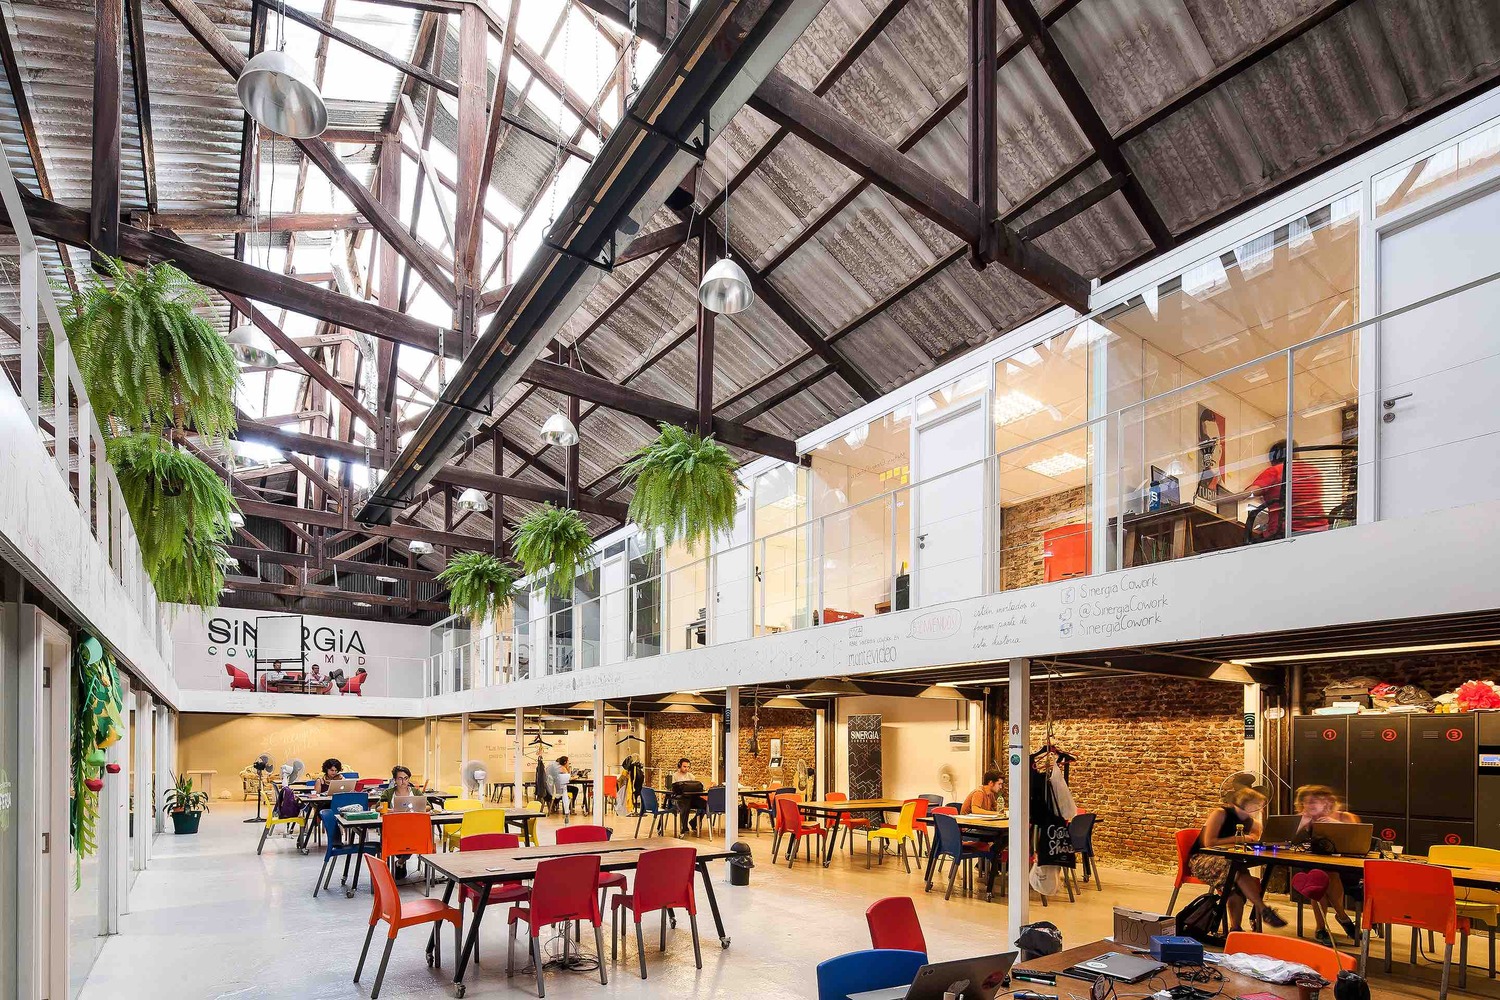 An Entrepreneur’s Guide To Coworking Spaces in Latin America – Nathan